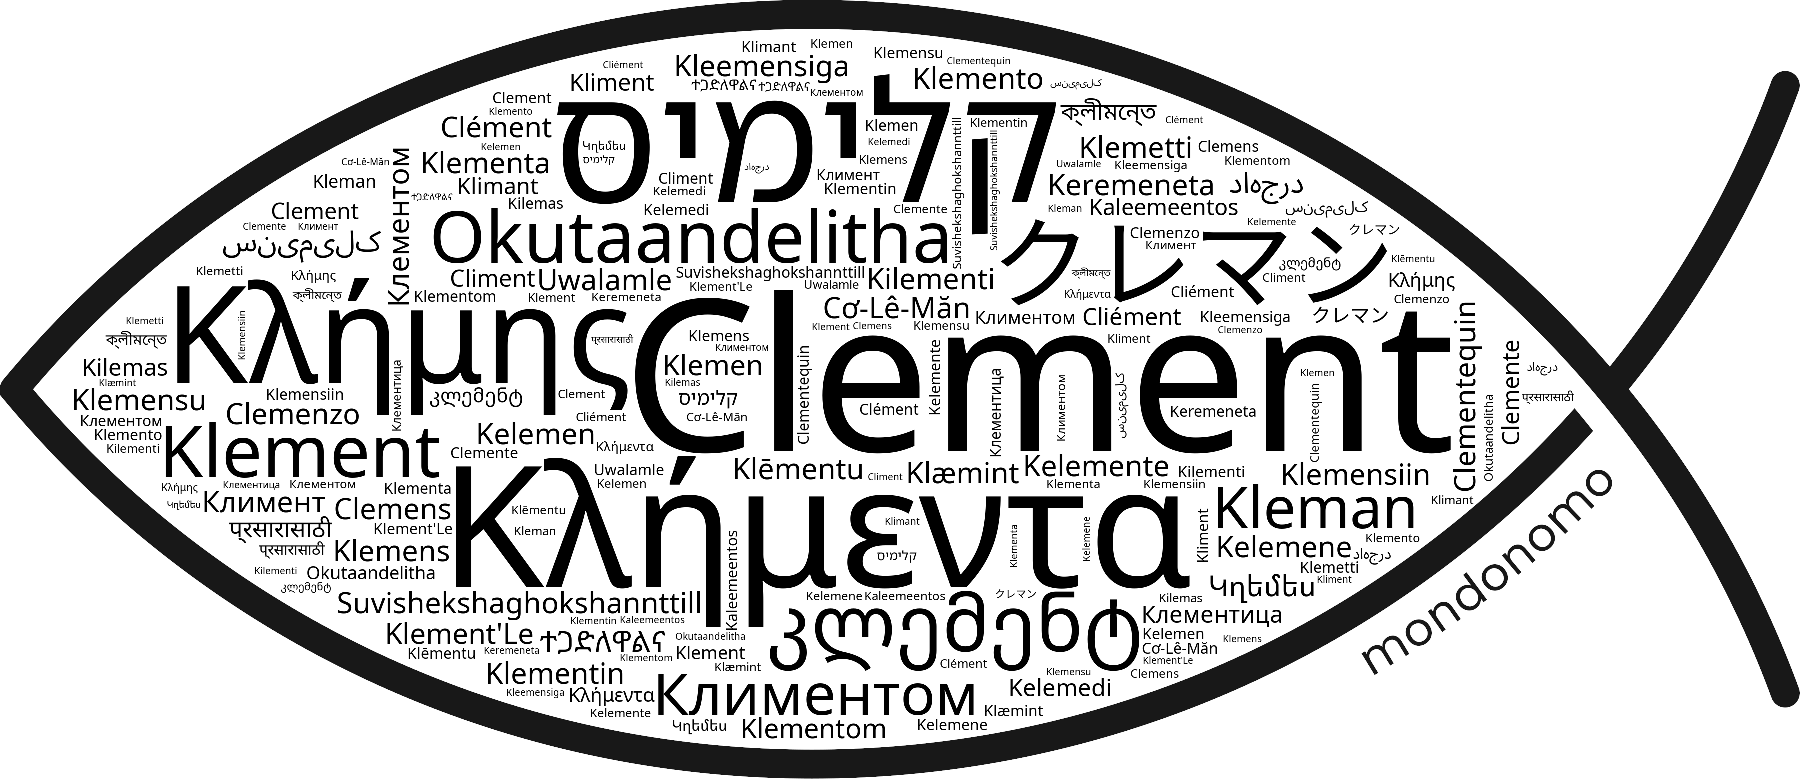 Name Clement in the world's Bibles